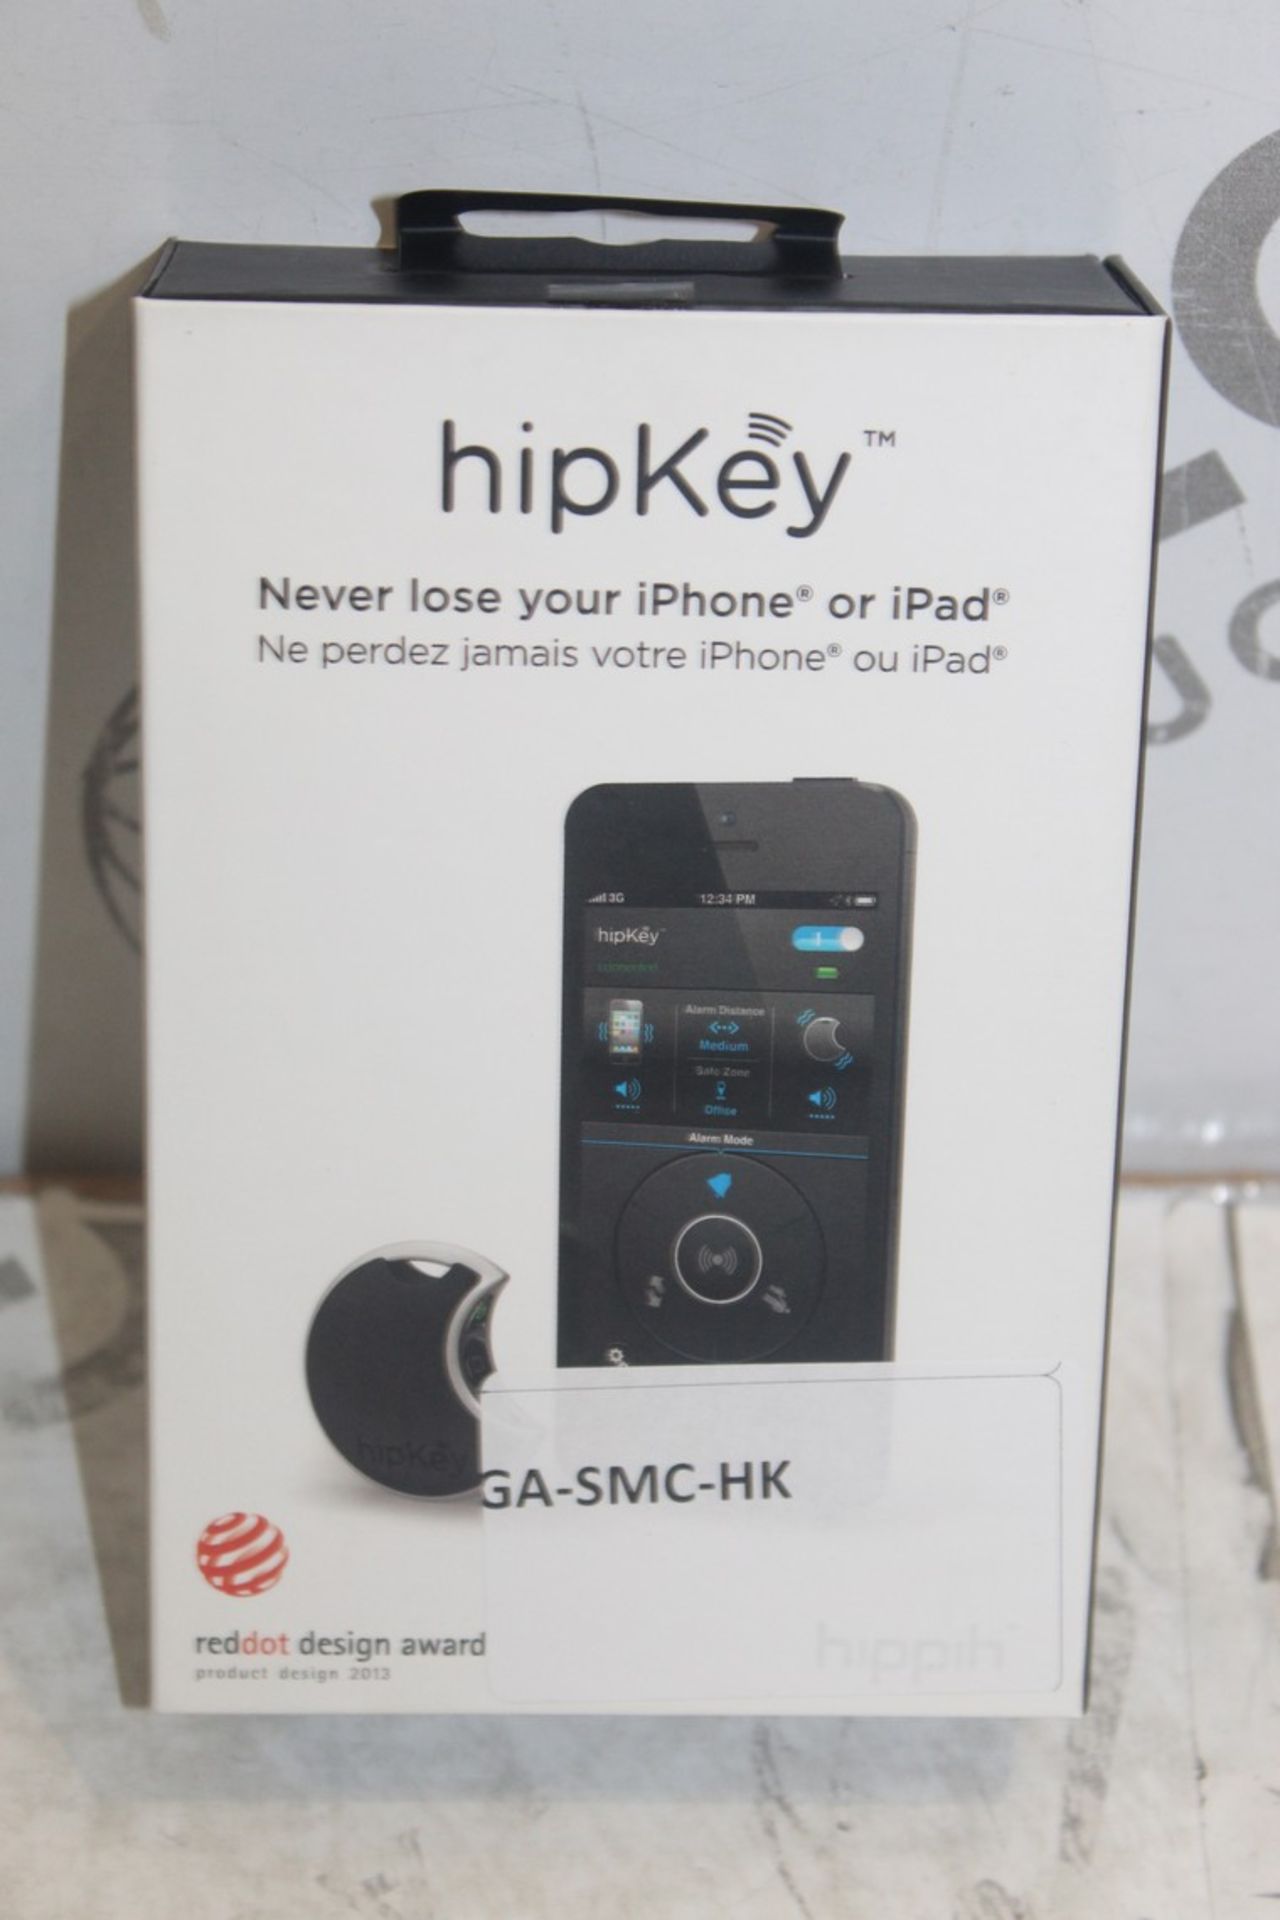 Lot To Contain 2 Hip Key Never Lose Your iPhone Or iPad Combined RRP £140 (Pictures Are For